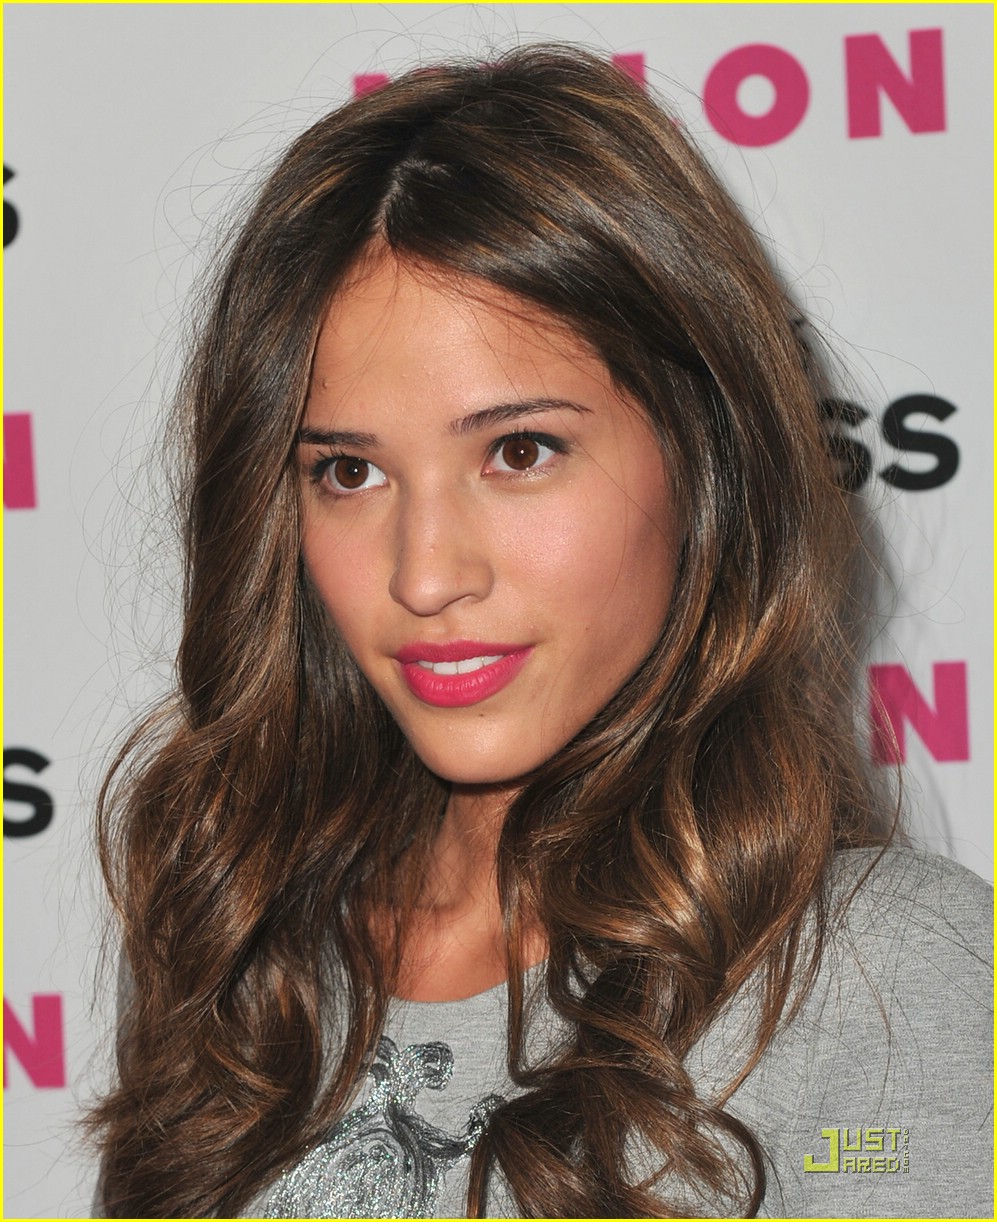 kelsey chow beauty tips 01